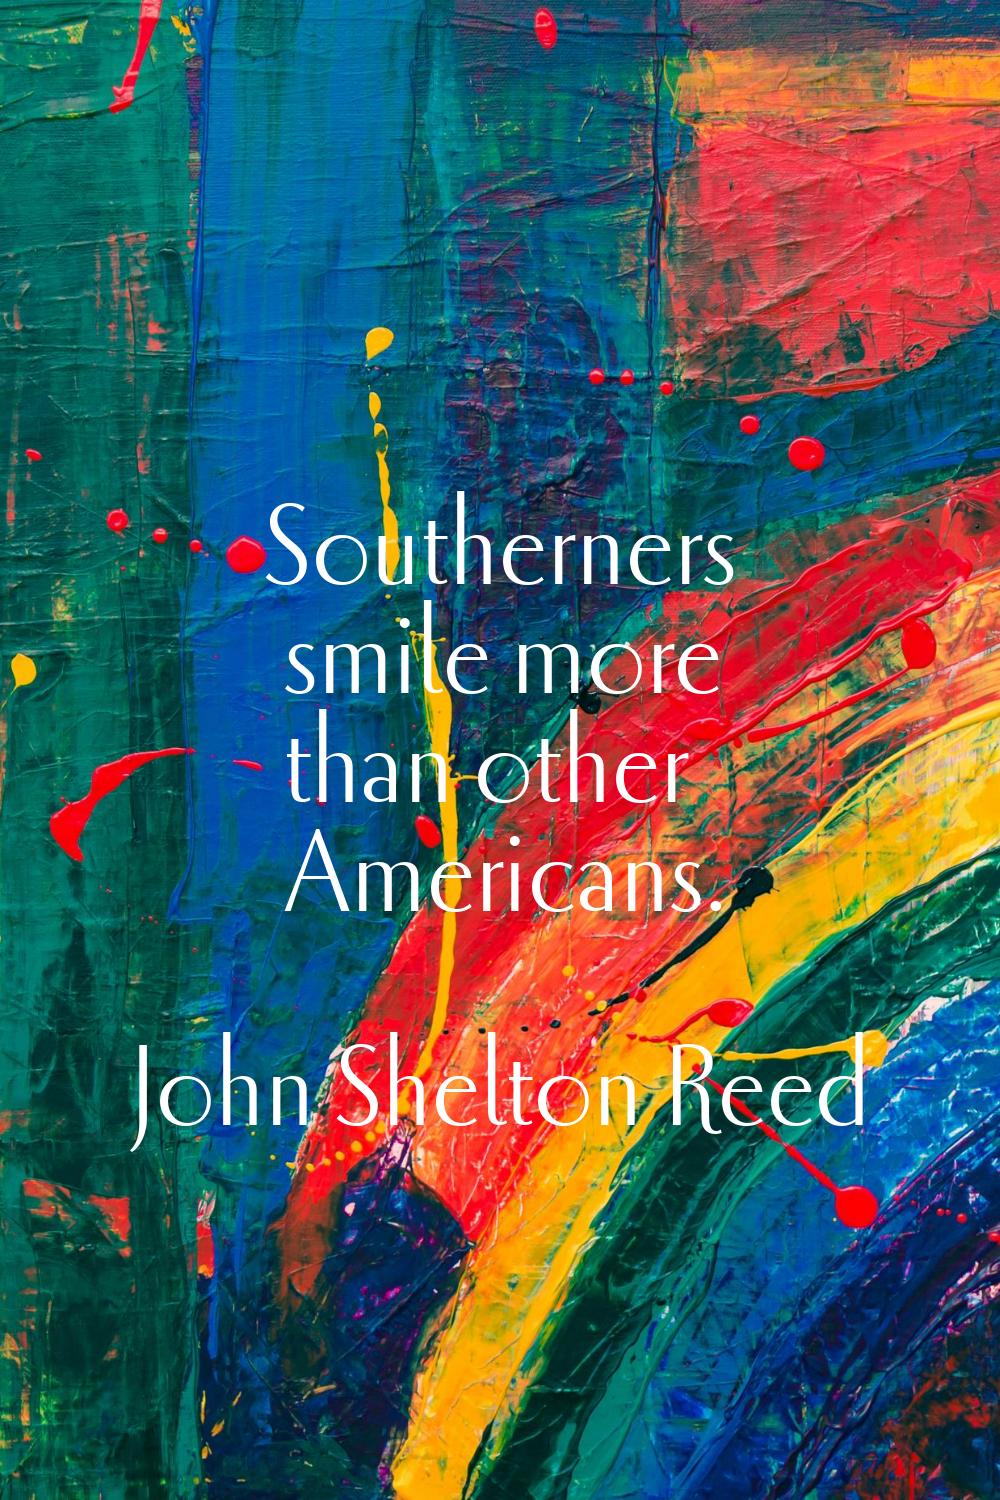 Southerners smile more than other Americans.